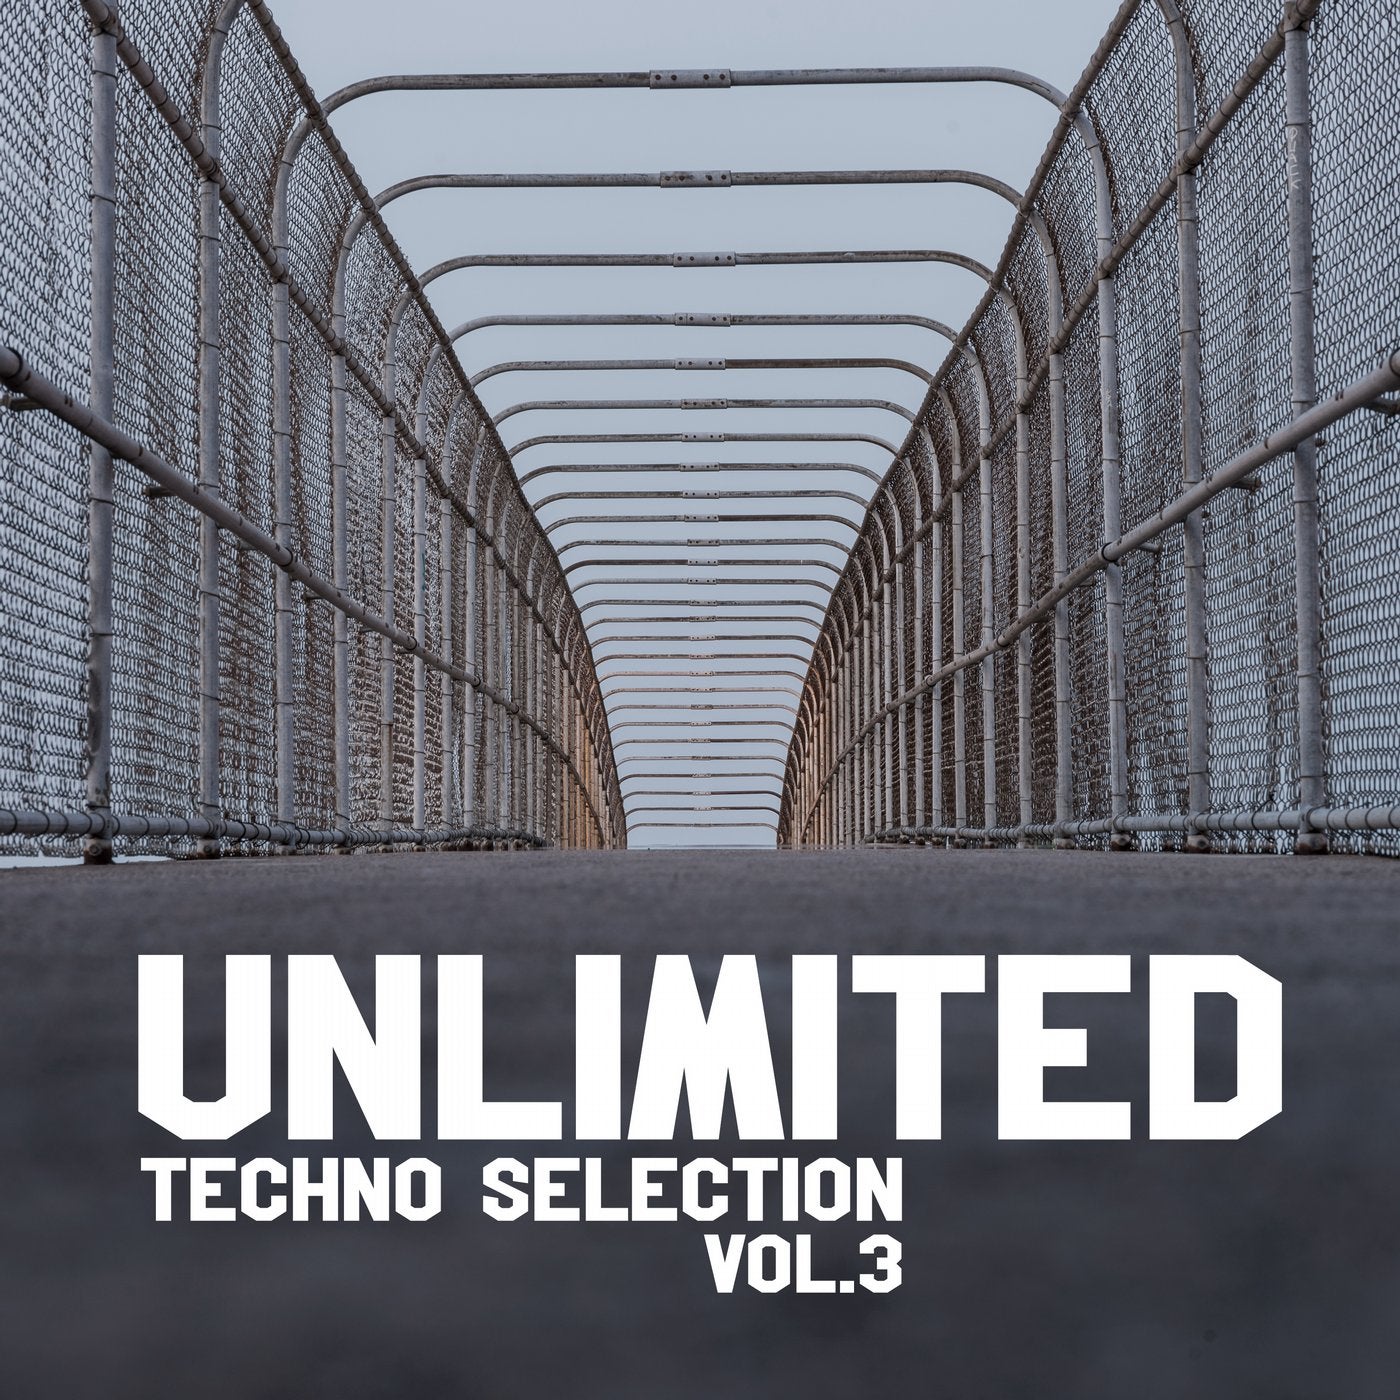 Unlimited Techno Selection, Vol. 3